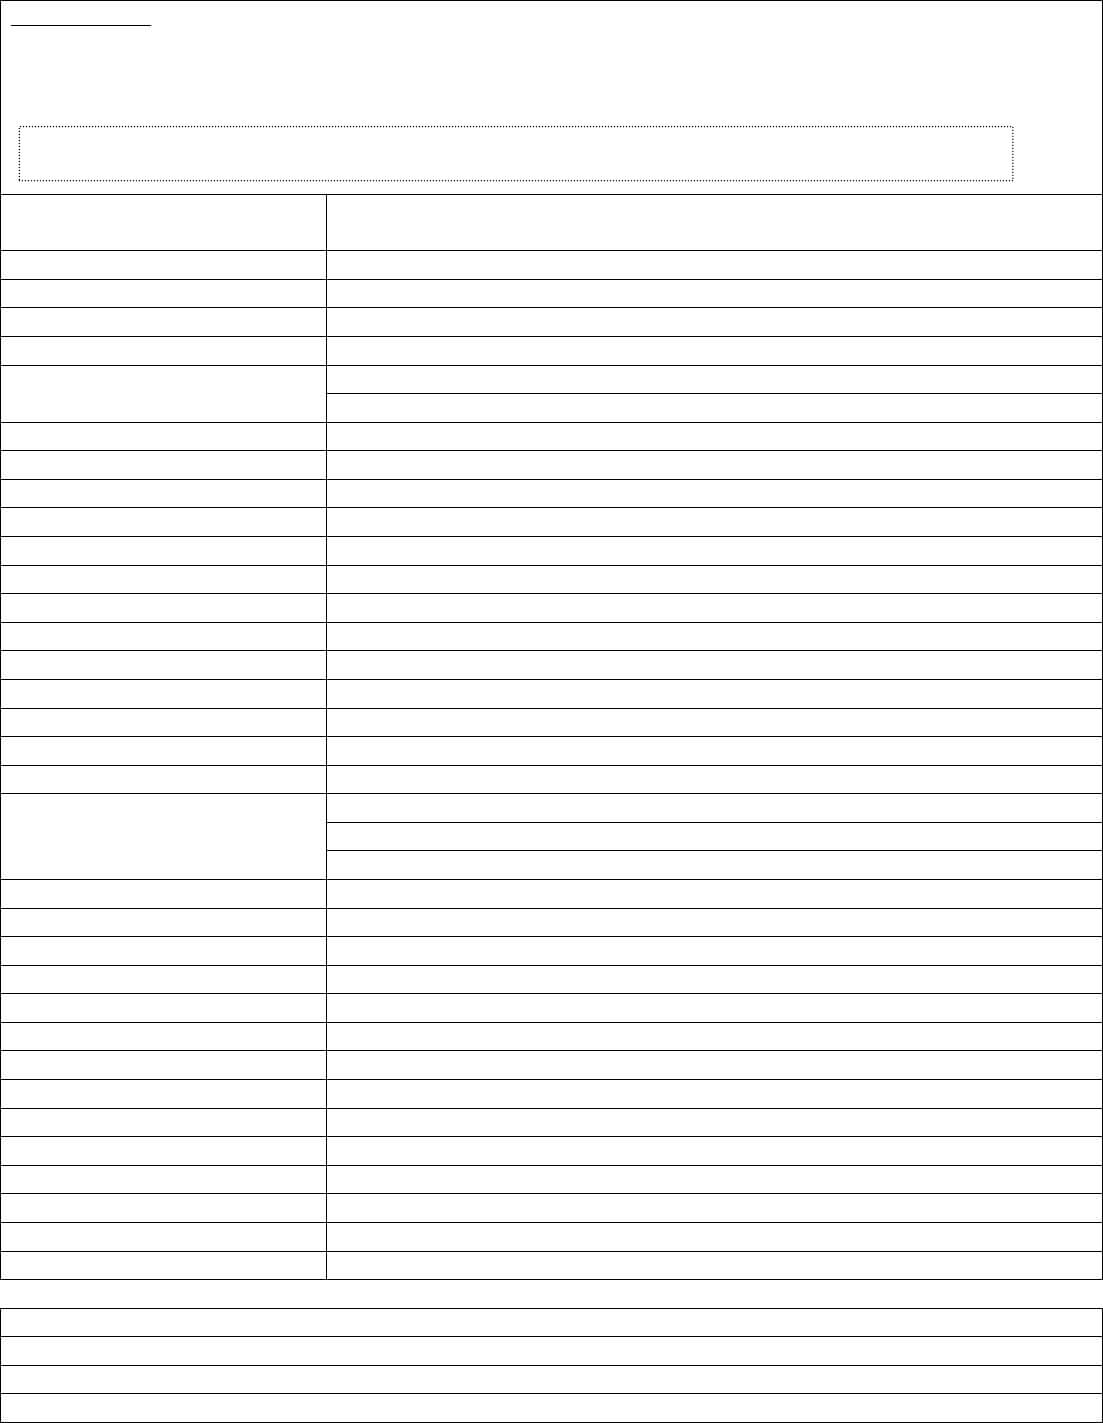 Cornell Notes Template In Word And Pdf Formats In Avid Cornell Note Template